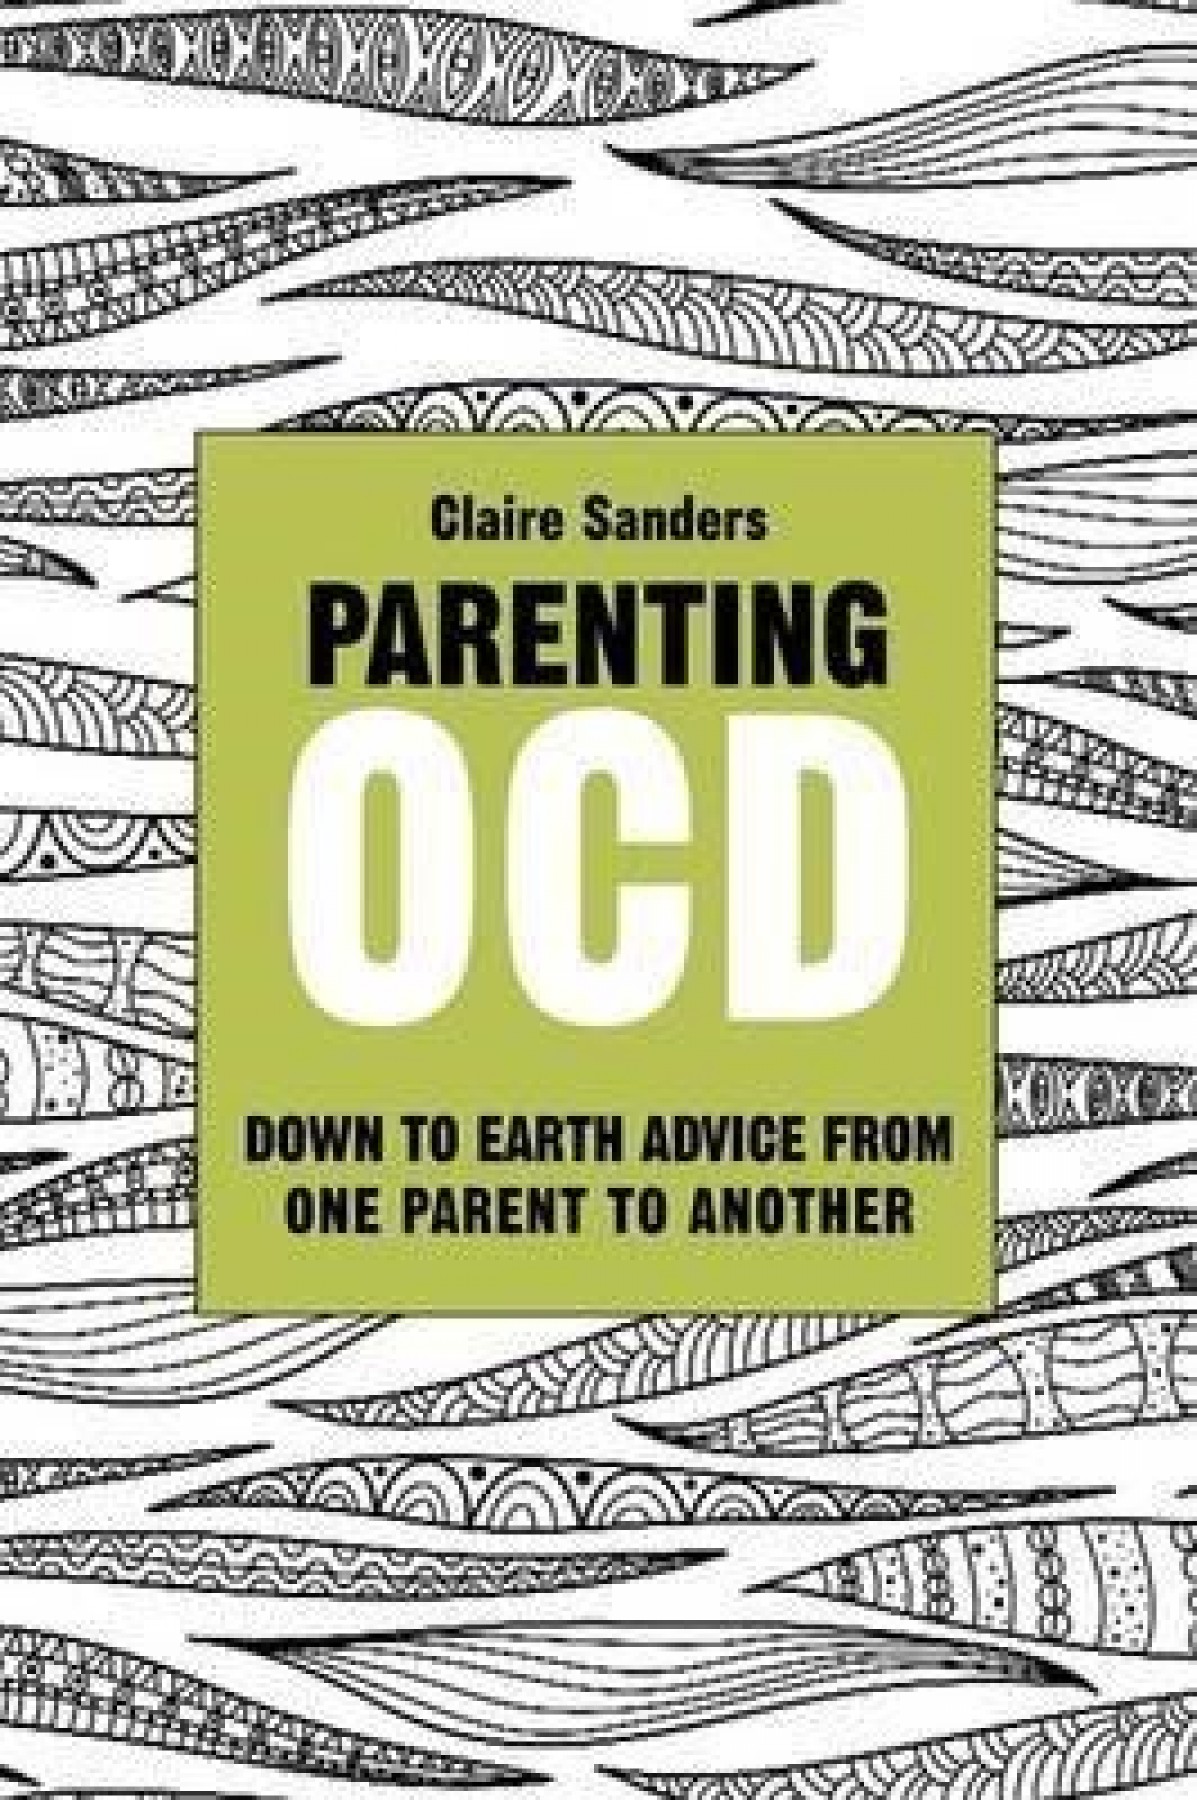 Parenting OCD: Down to earth advice from one parent to another